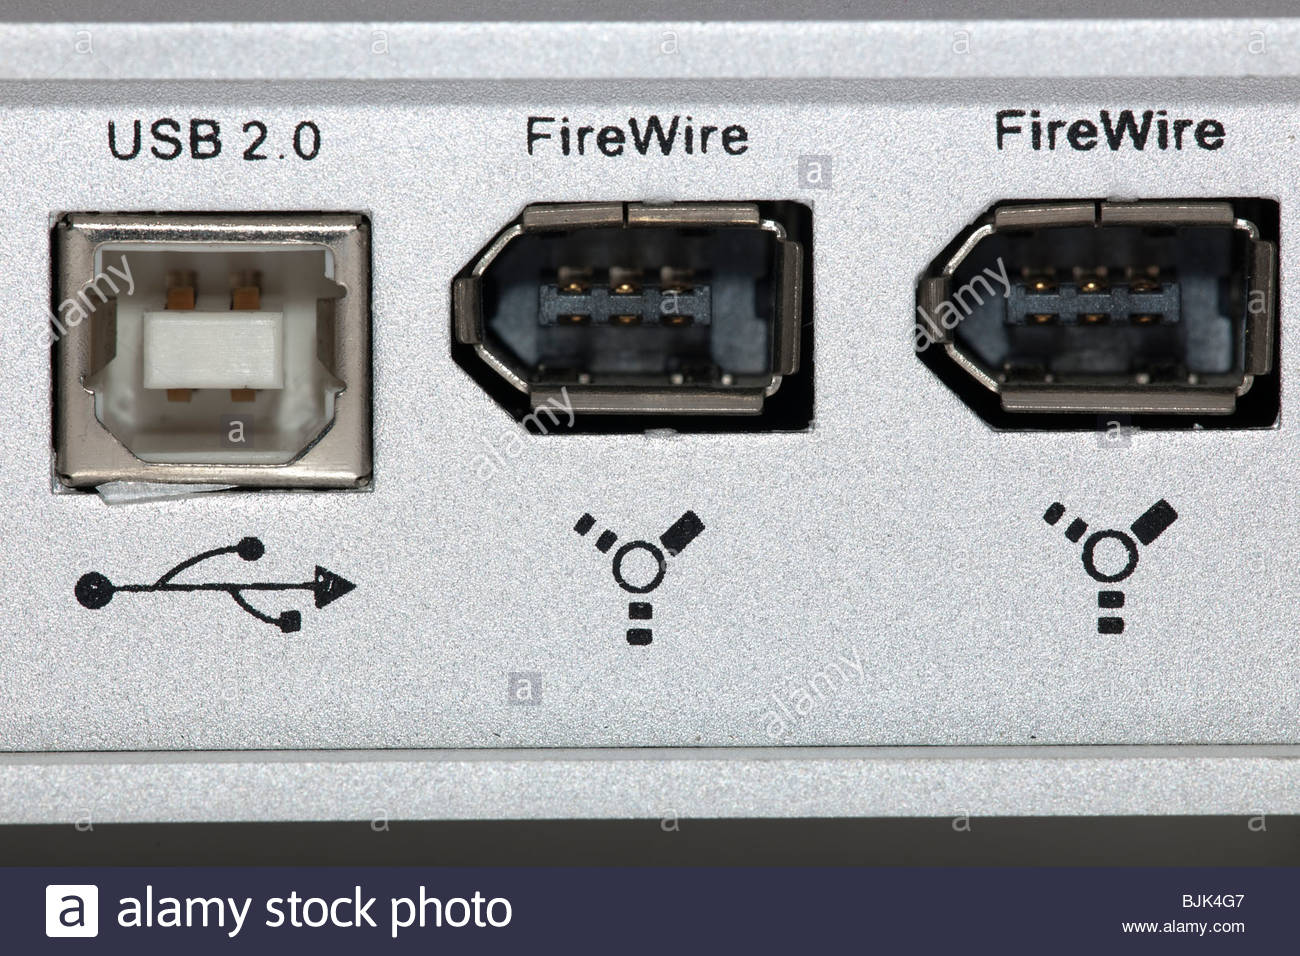 Firewire connectors types